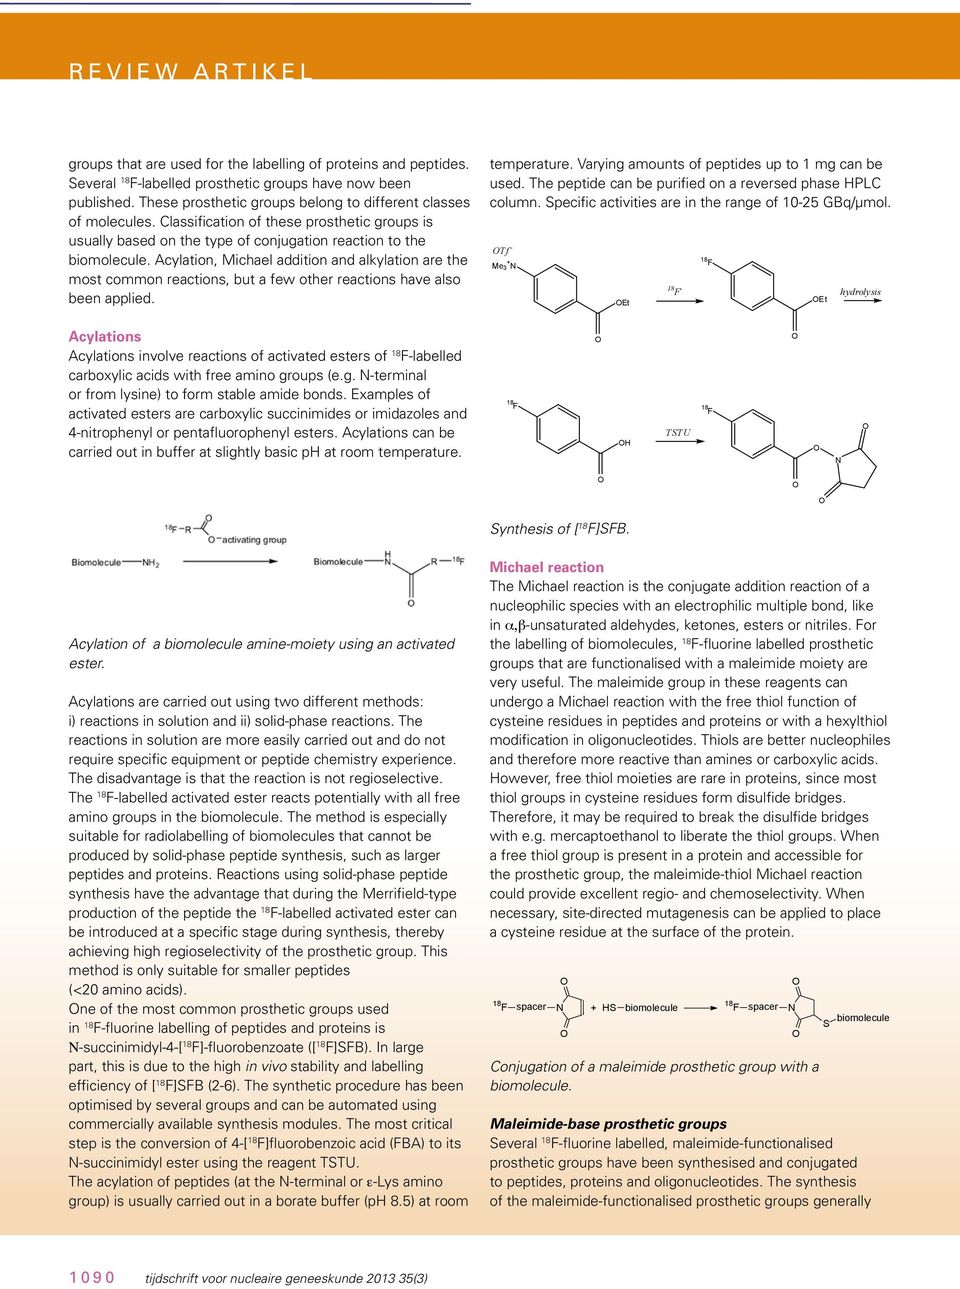 Acylation, Michael addition and alkylation are the most common reactions, but a few other reactions have also been applied. temperature. Varying amounts of peptides up to 1 mg can be used.